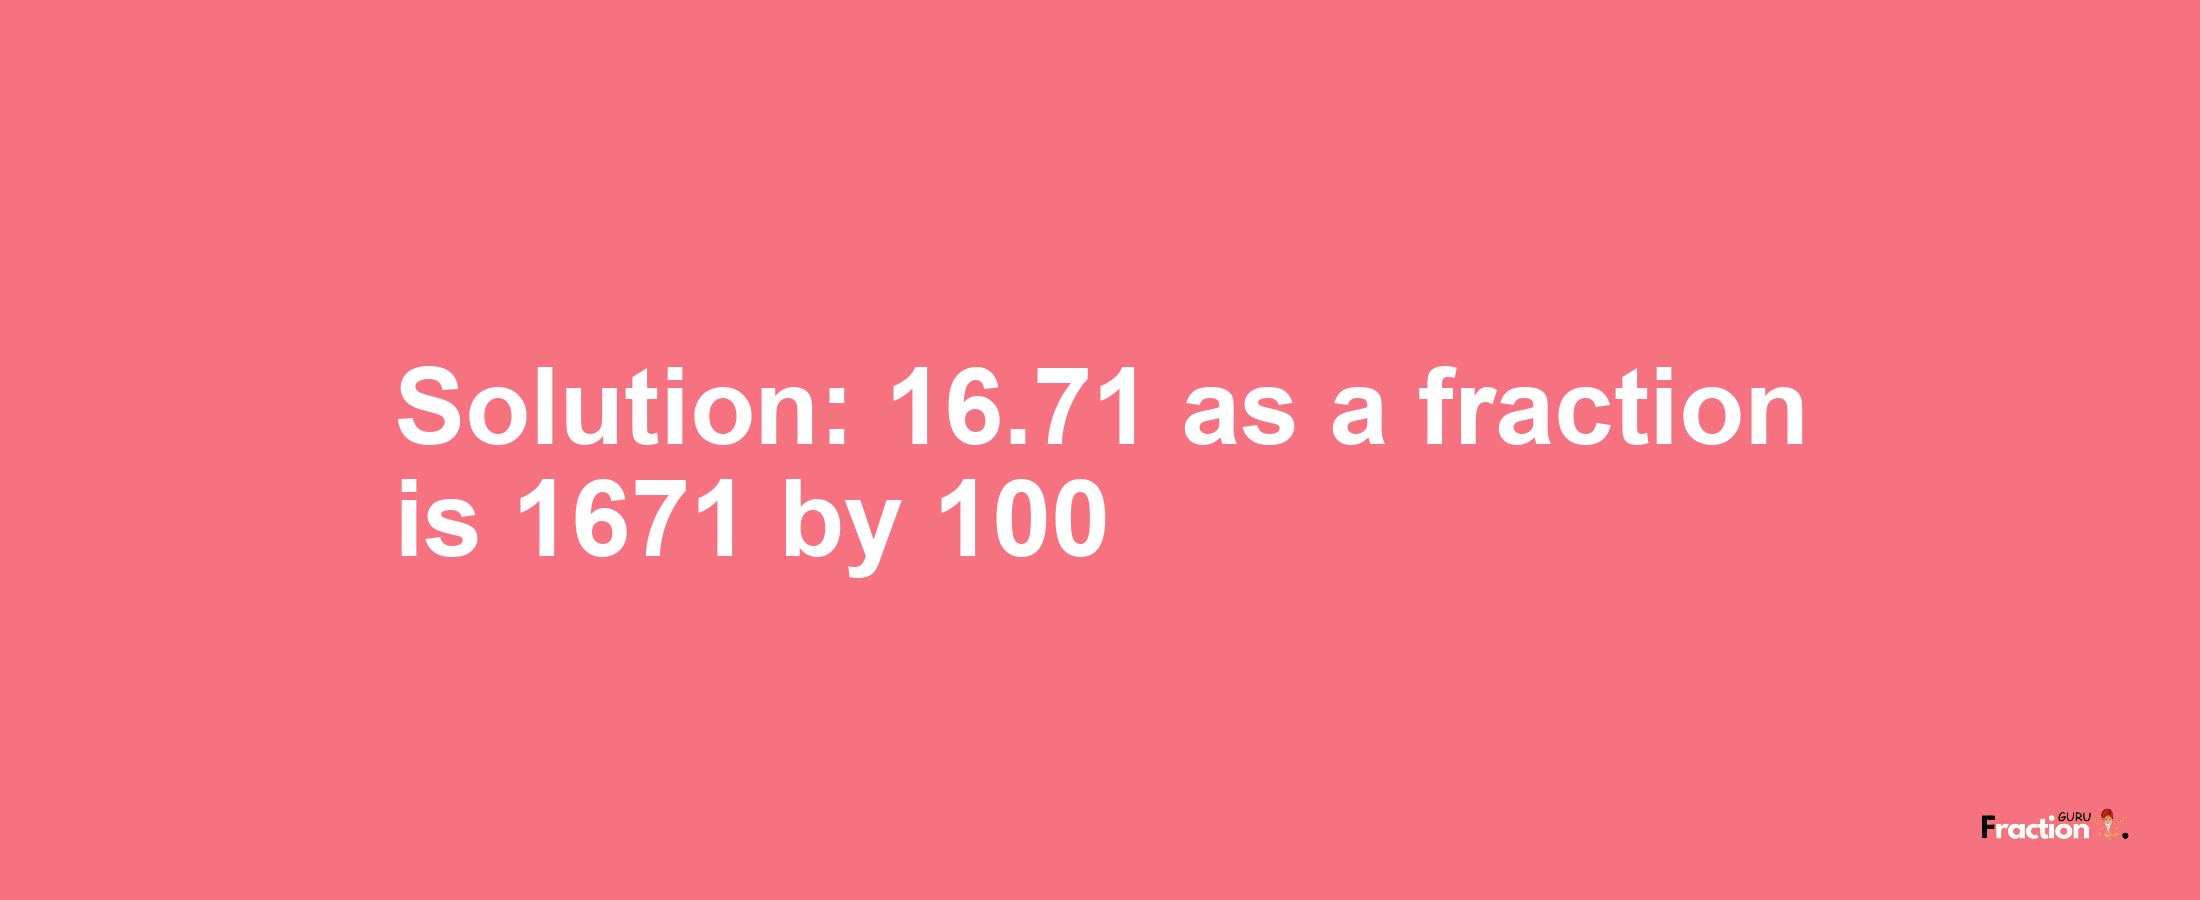 Solution:16.71 as a fraction is 1671/100